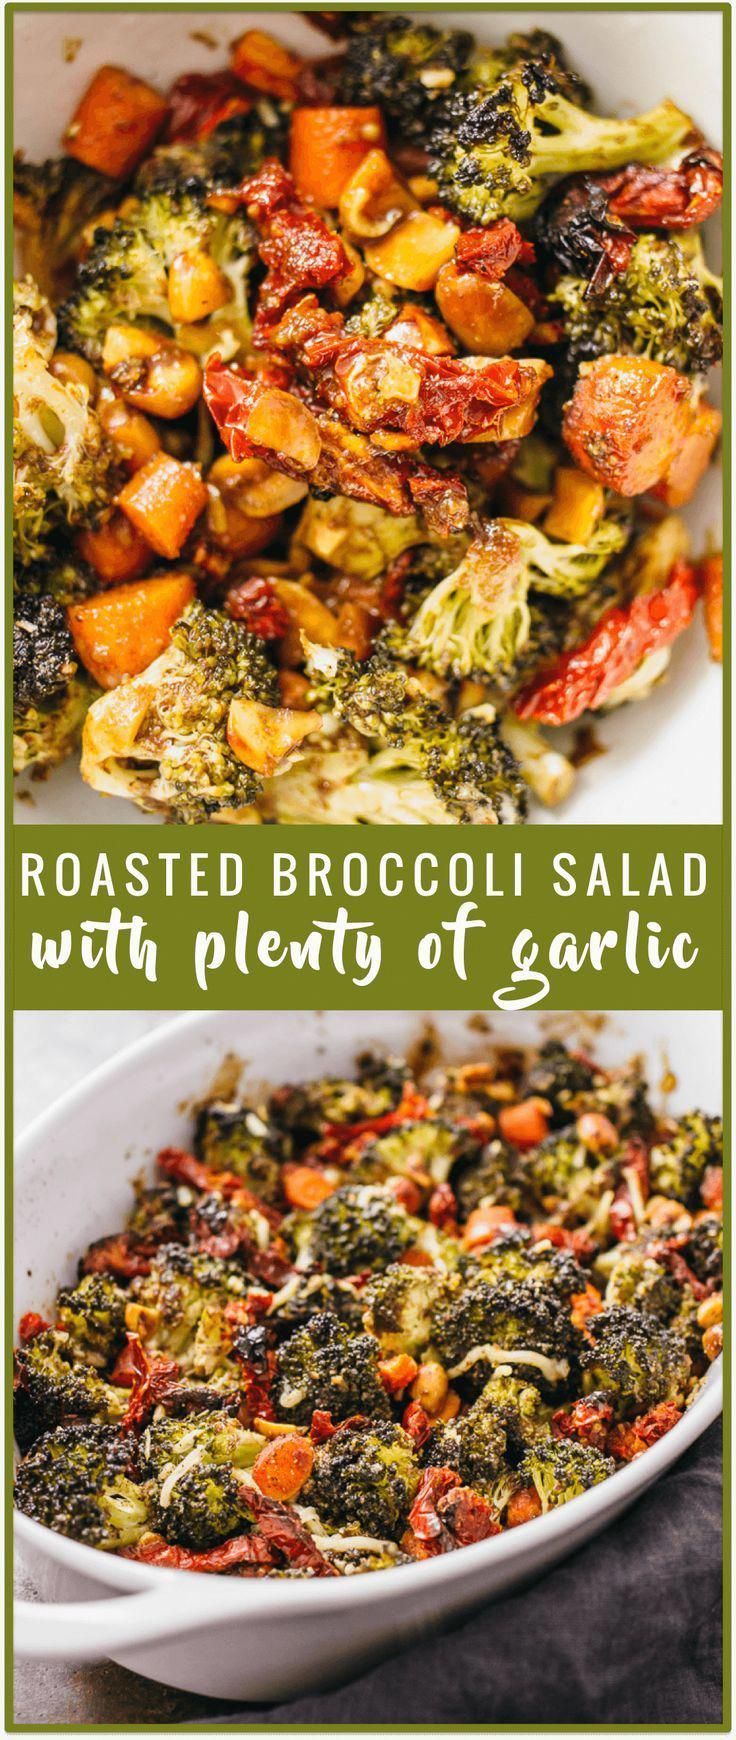 Balsamic roasted broccoli salad with garlic - Savory Tooth -   17 healthy recipes Salad ovens ideas